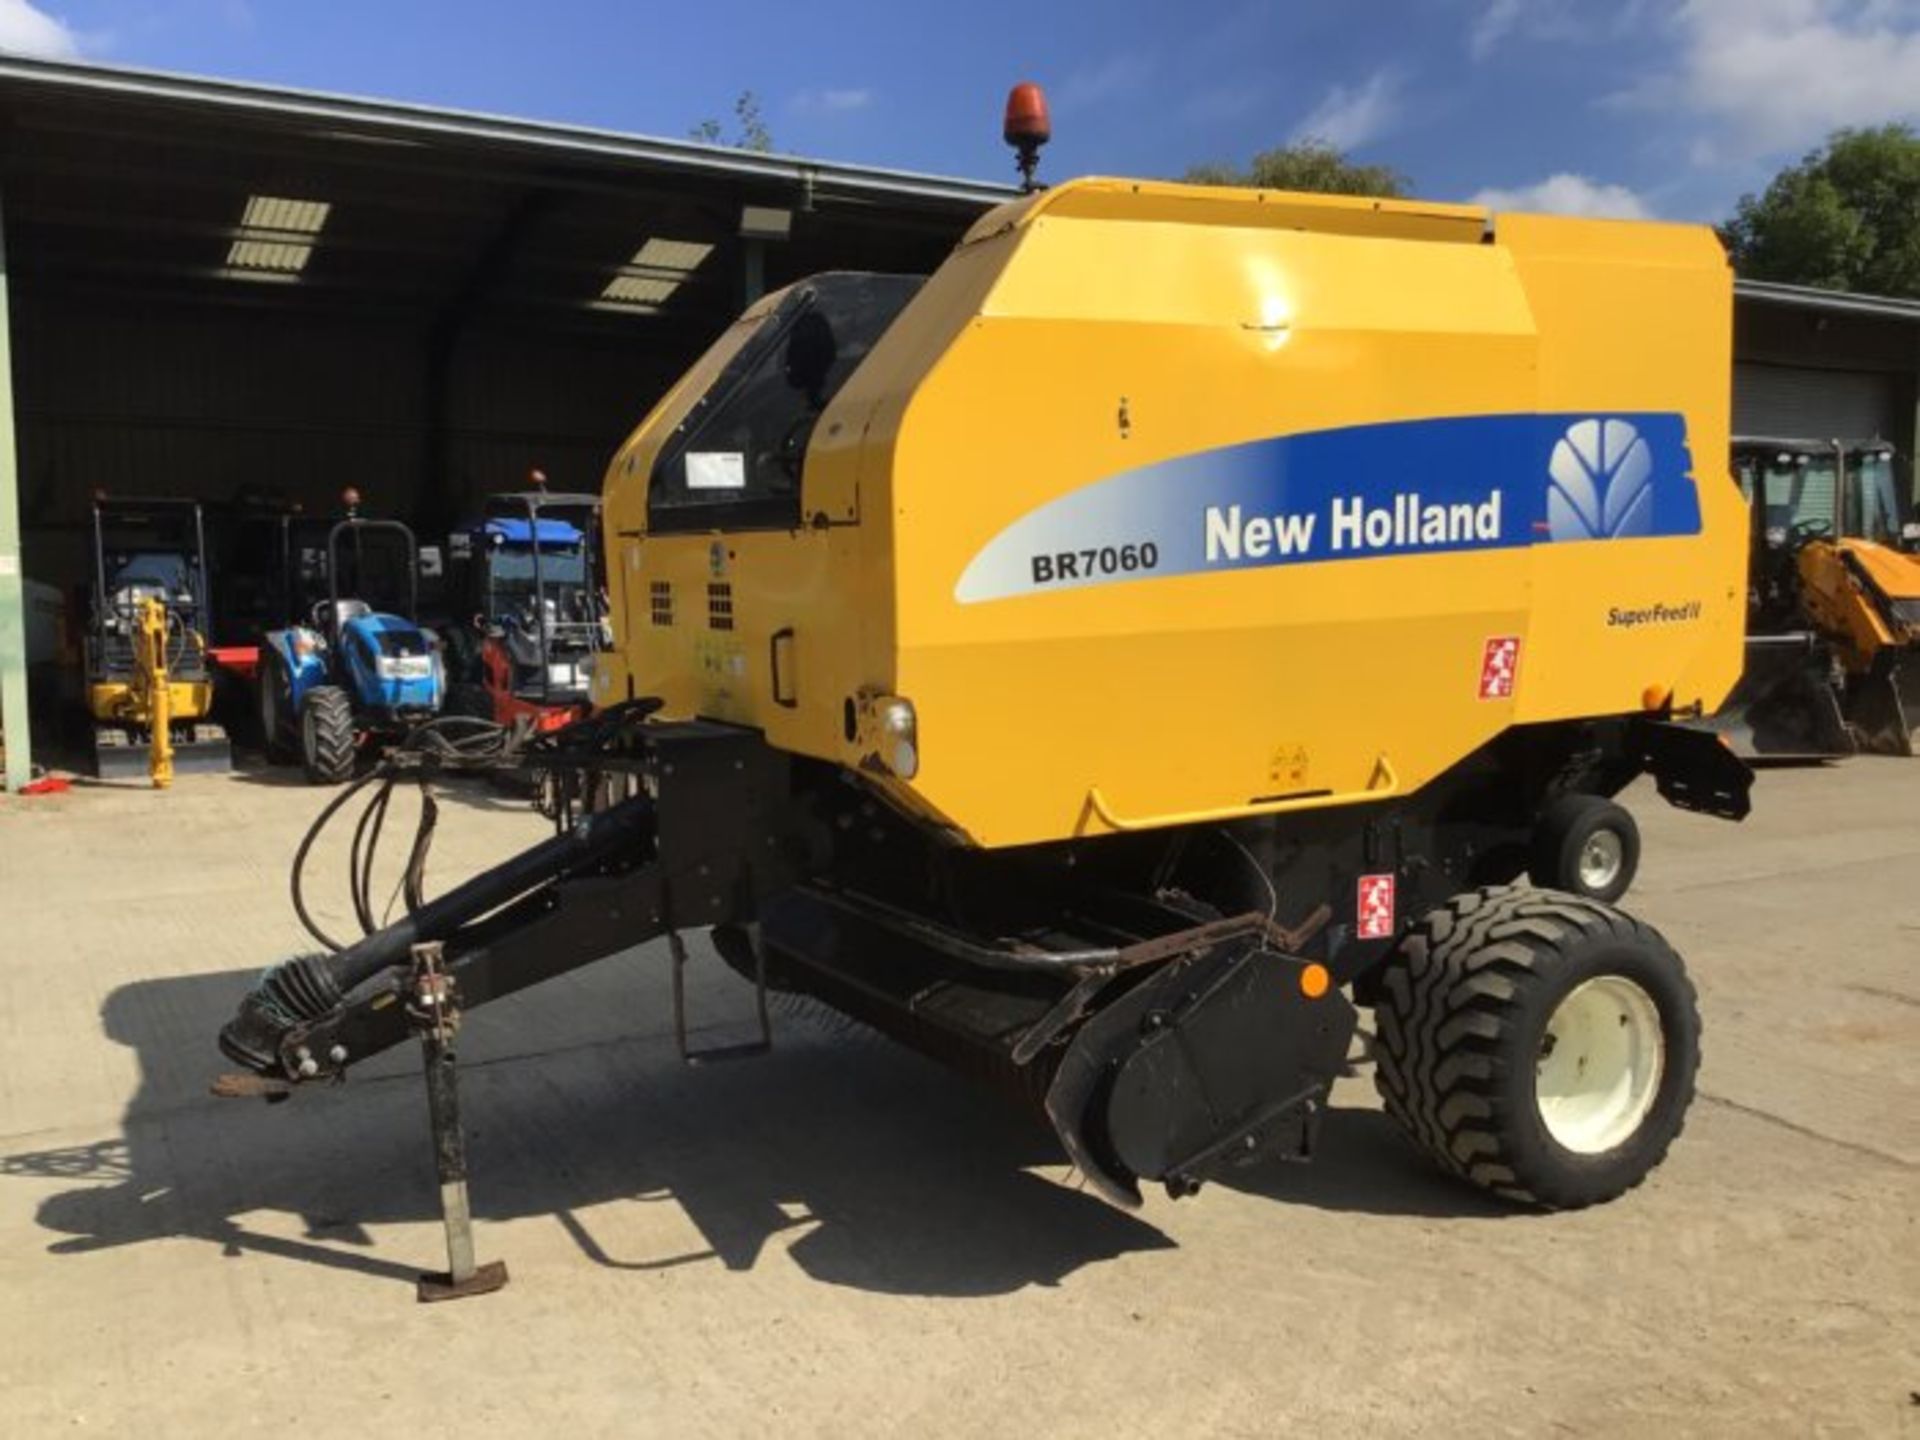 NEW HOLLAND BR7060 - Image 8 of 8